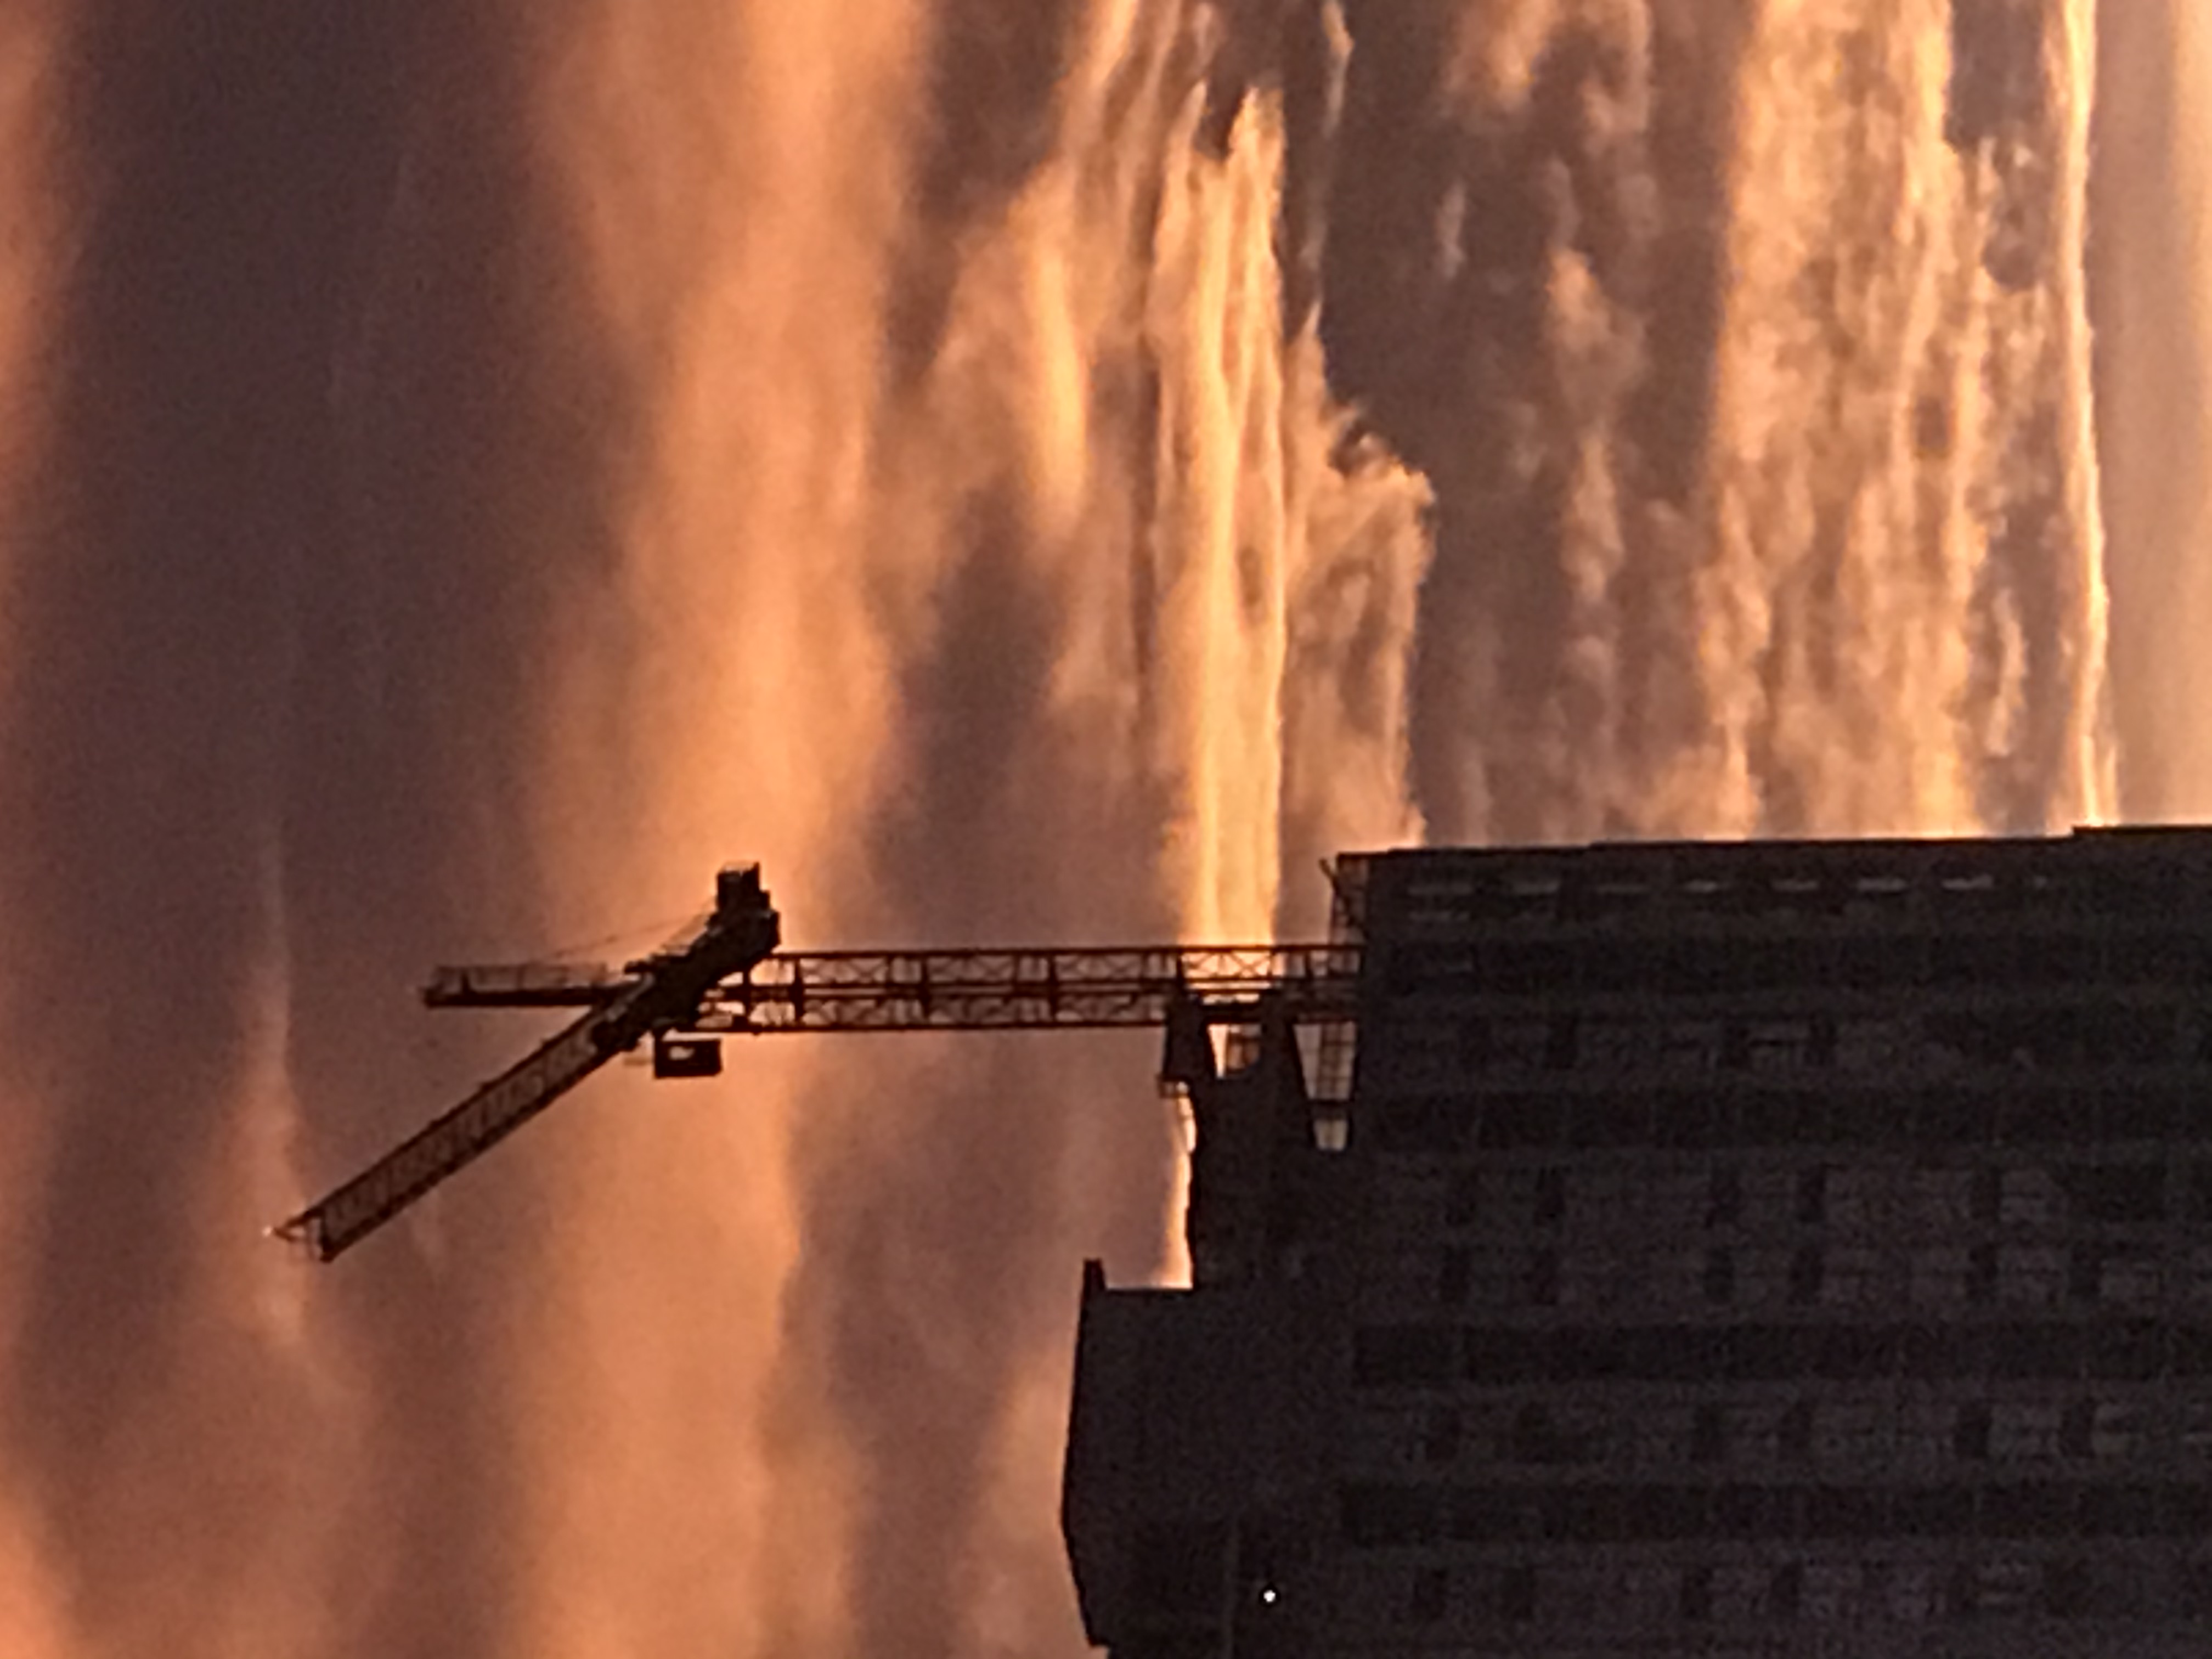 A photograph of golden sky and an unfinished expensive high-rise complex sitting in front on the left with a crane.